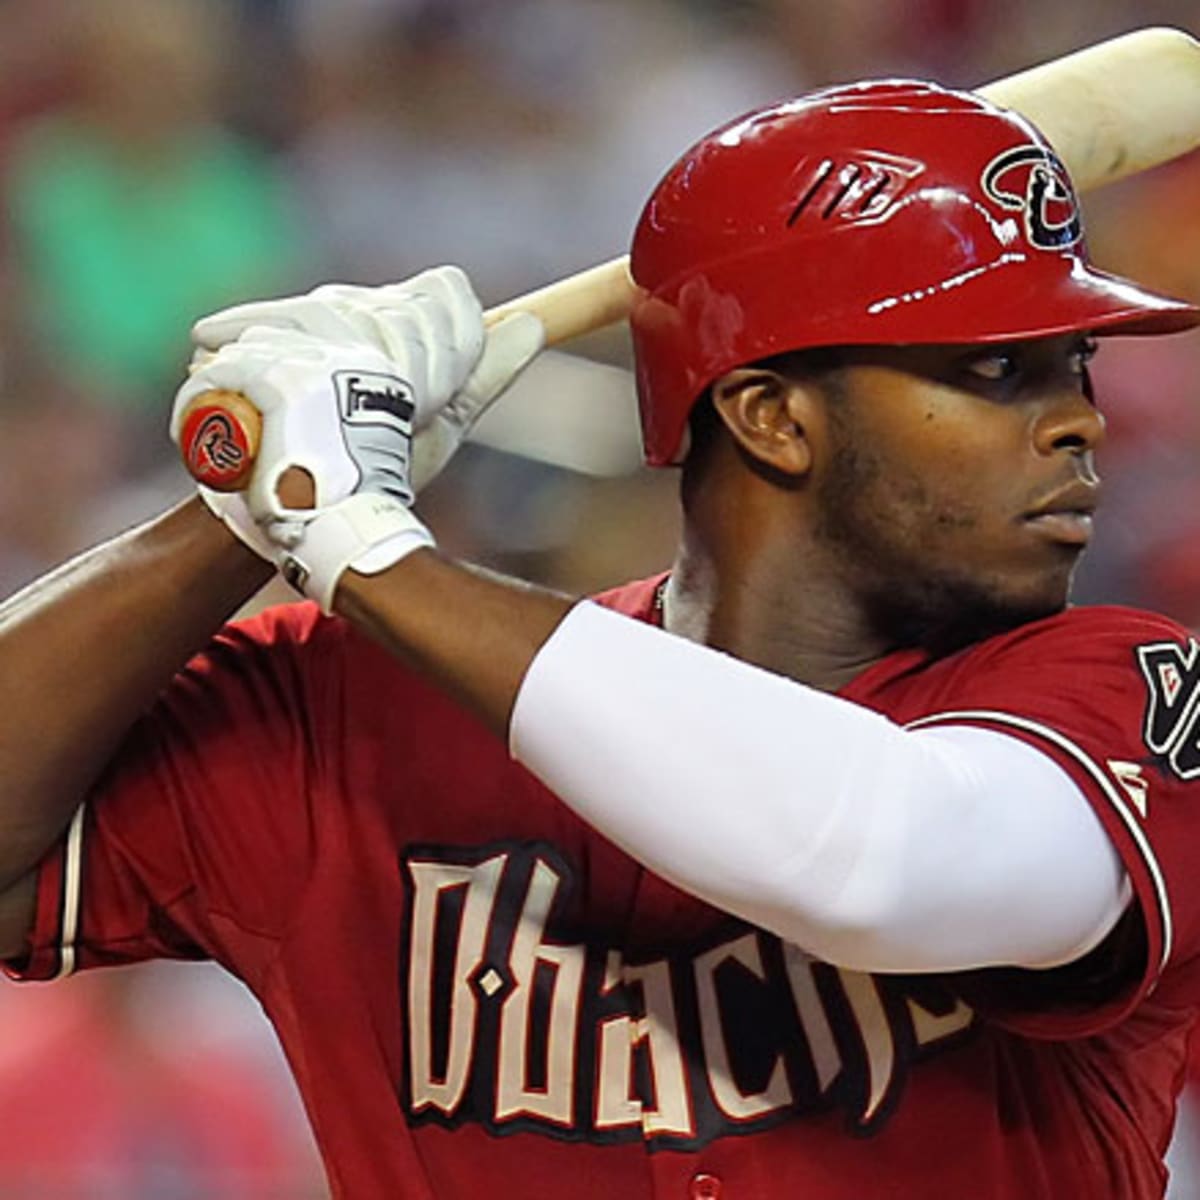 B.J. Upton, Braves agree to 5-year deal: source